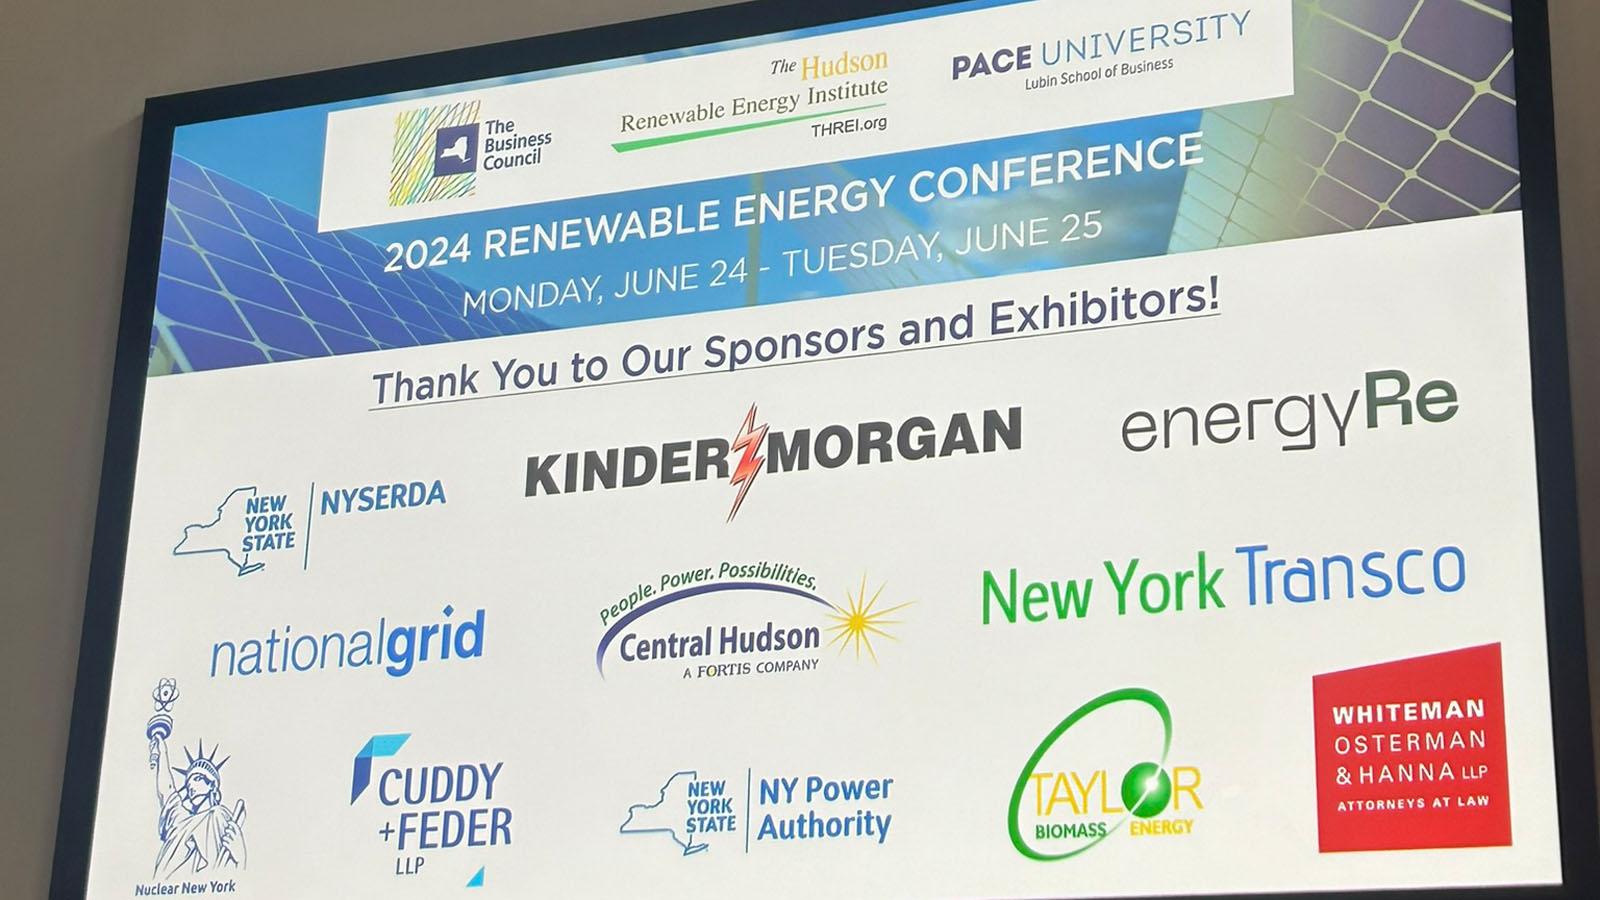  2024 Renewable Energy Conference sign listing sponsors and exhibitors: Kinder Morgan, NYSERDA, energyRe, National Grid, Central Hudson Gas & Electric Corp., New York Transco, Taylor Biomass Energy, Whiteman, Osterman & Hanna LLP, Nuclear New York, Cuddy & Feder LLP, and the New York Power Authority.